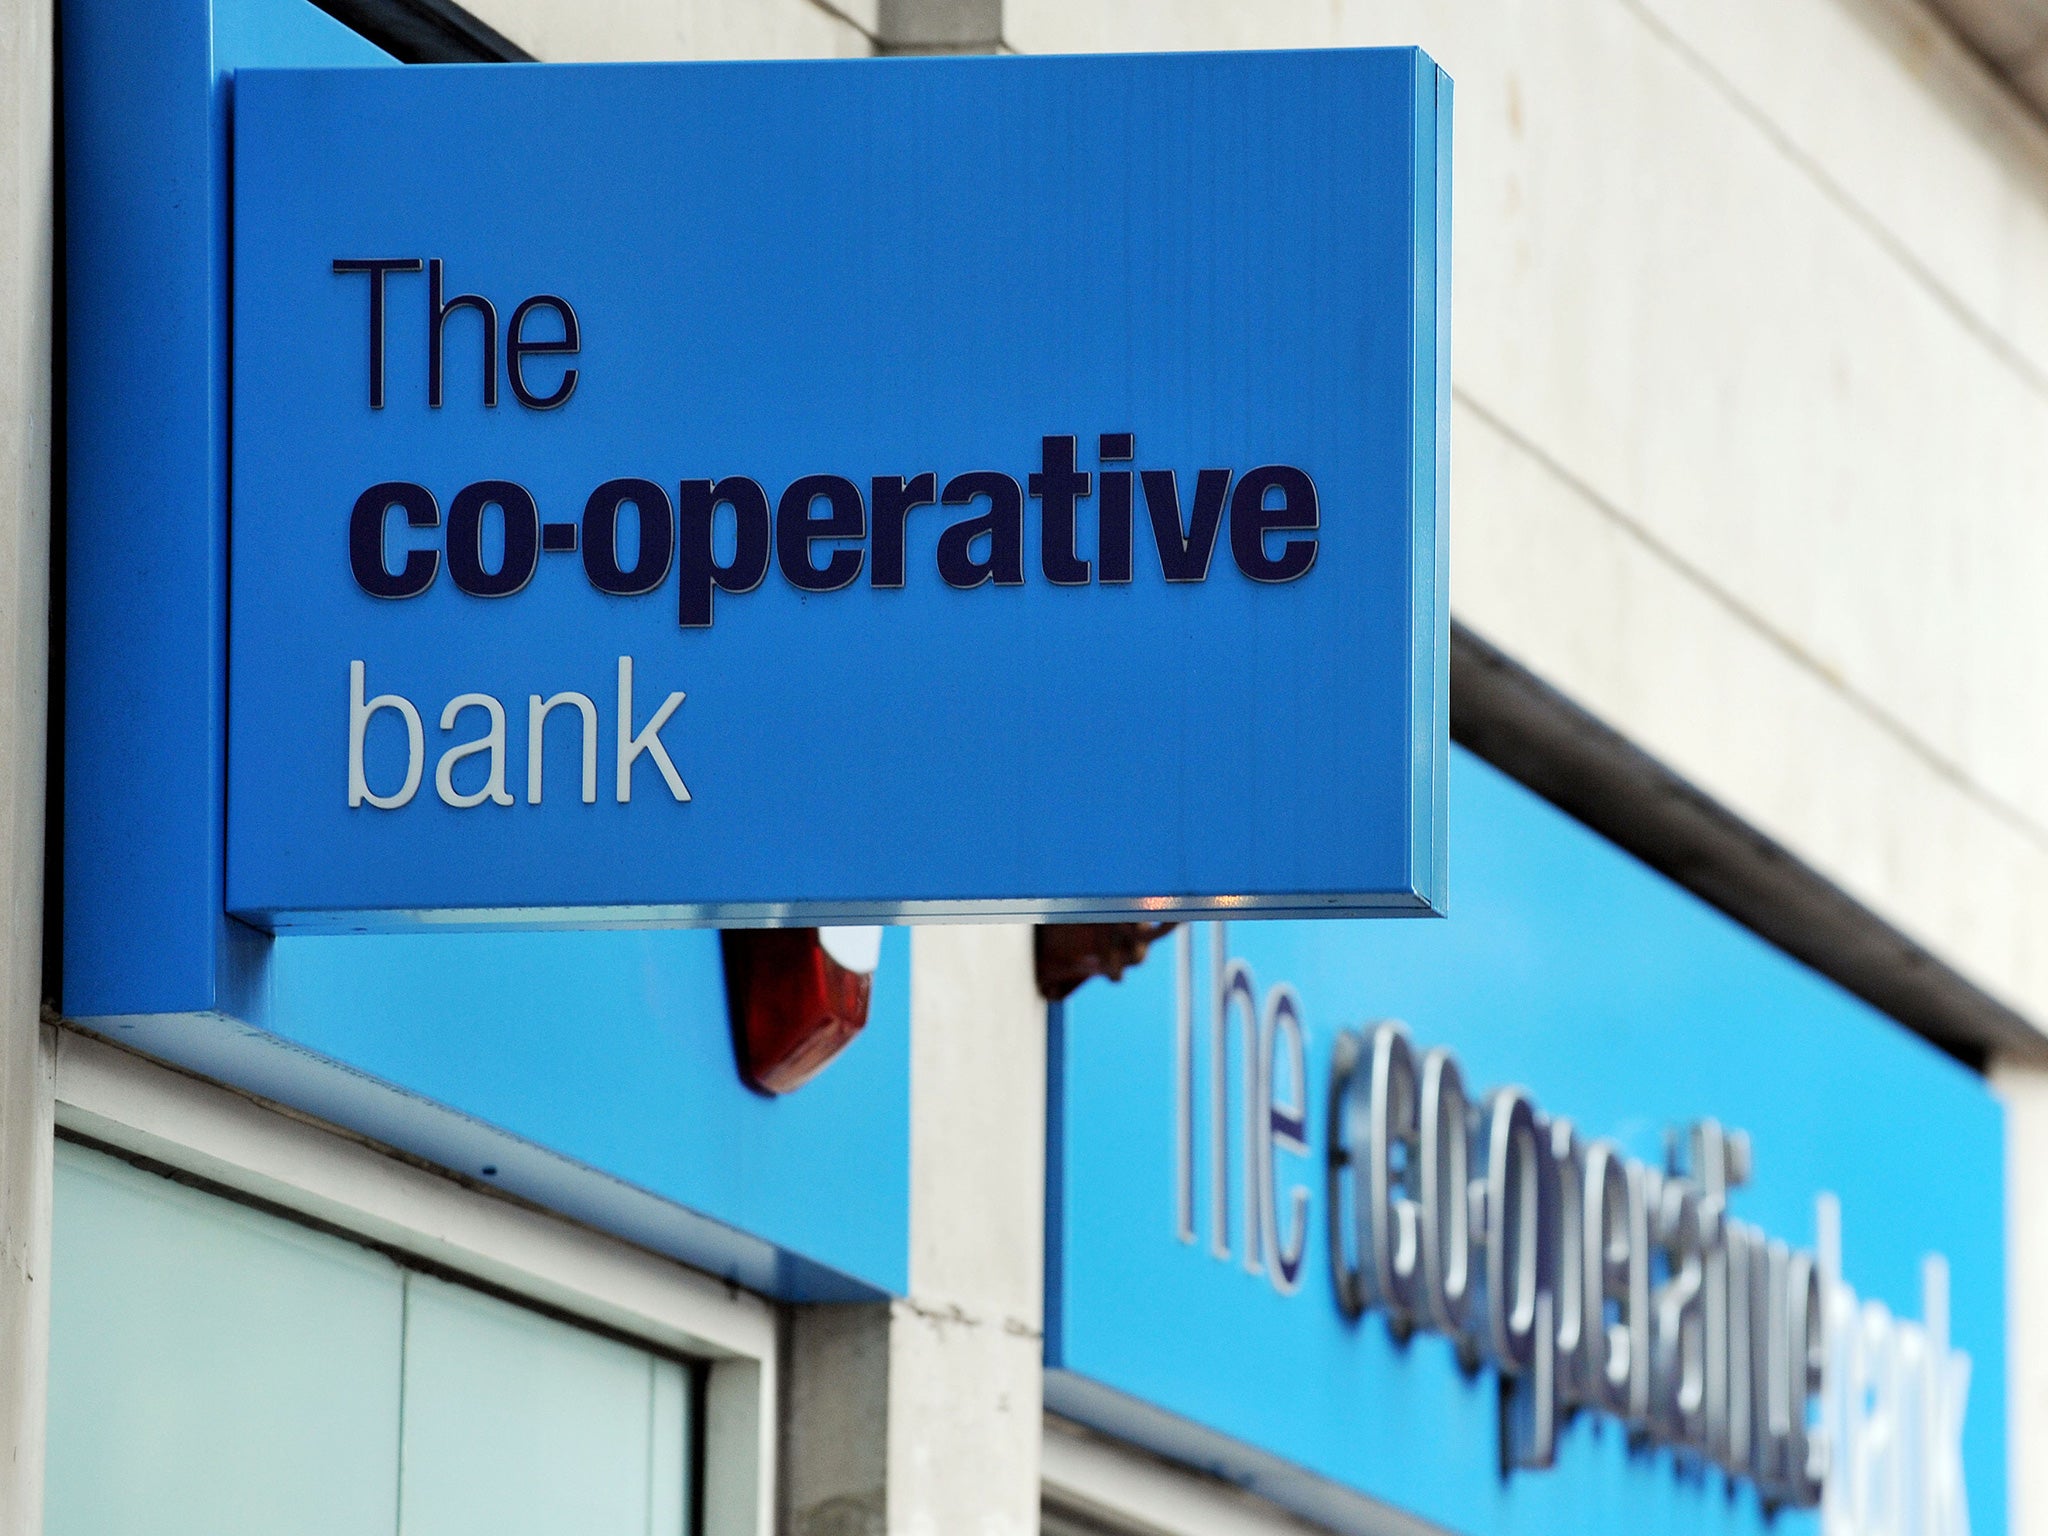 Co-op Bank almost went under in 2013 when under previous management